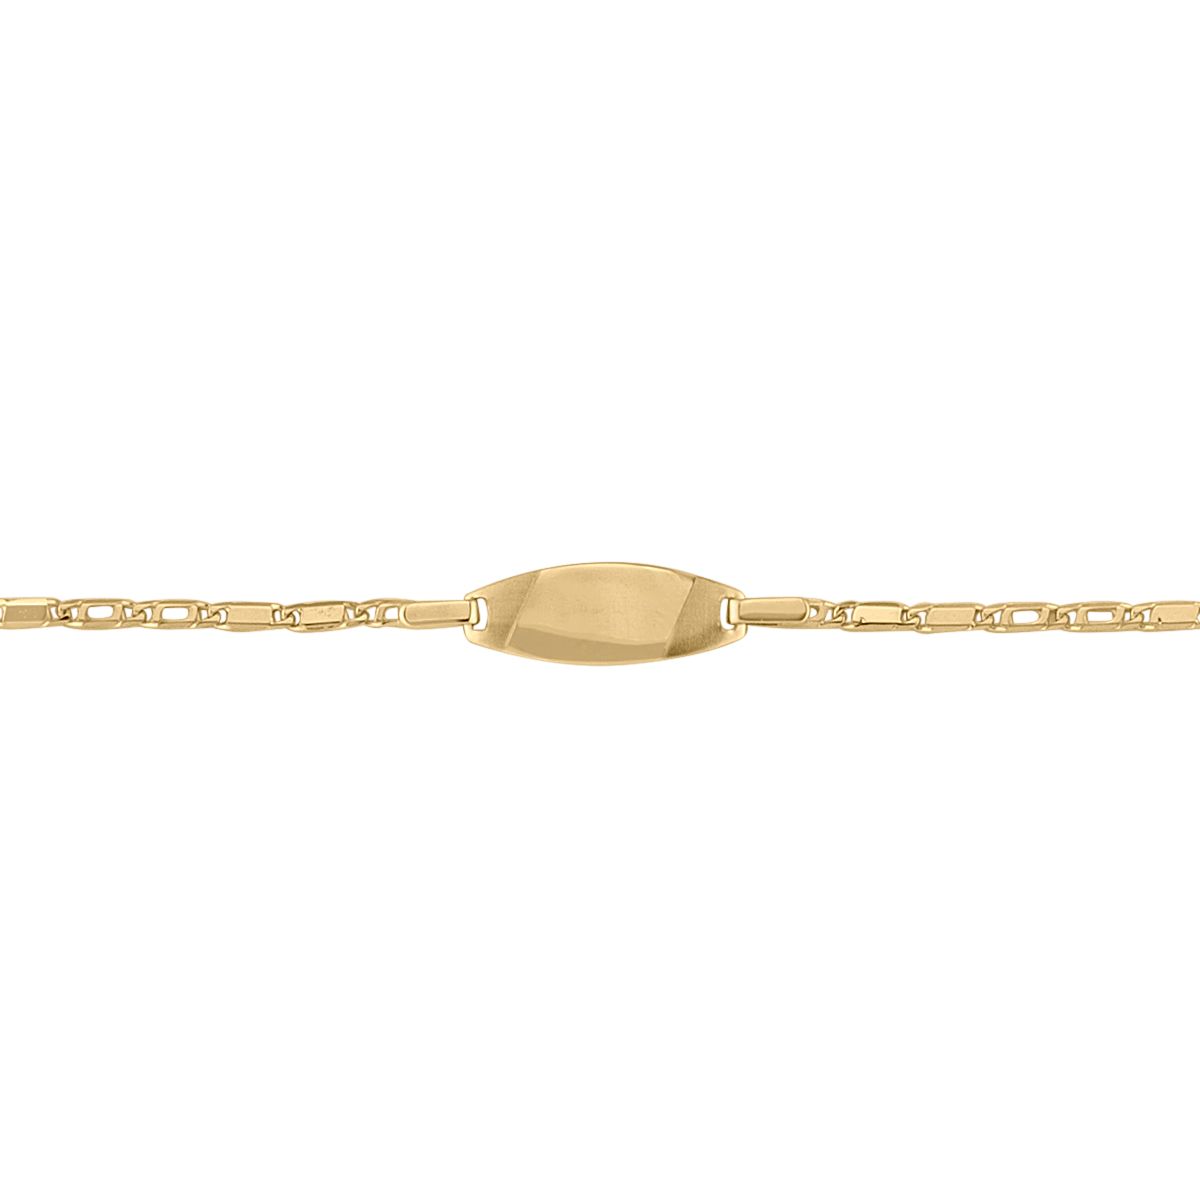 B0101, Gold Bracelet, Engravable ID, Yellow or White Gold